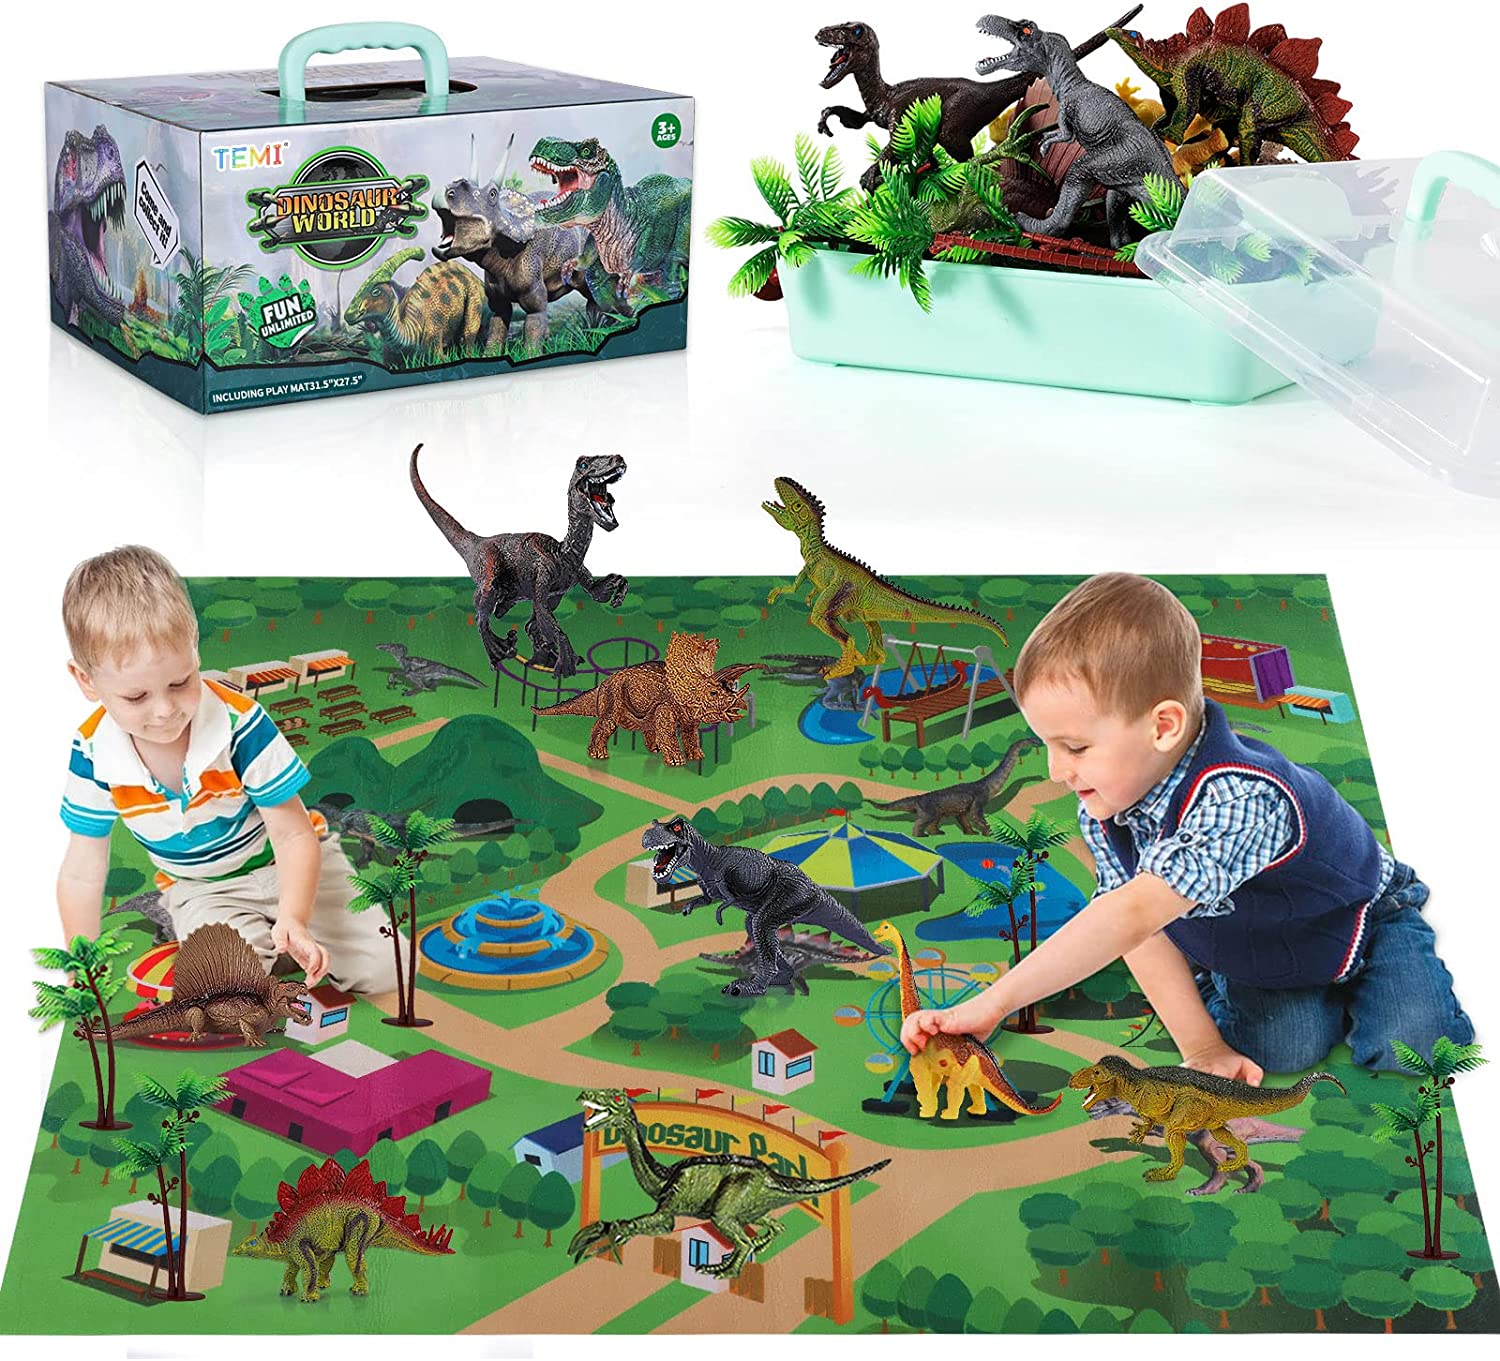 Review of TEMI Dinosaur Toys for Kids 3-5 with Activity Play Mat